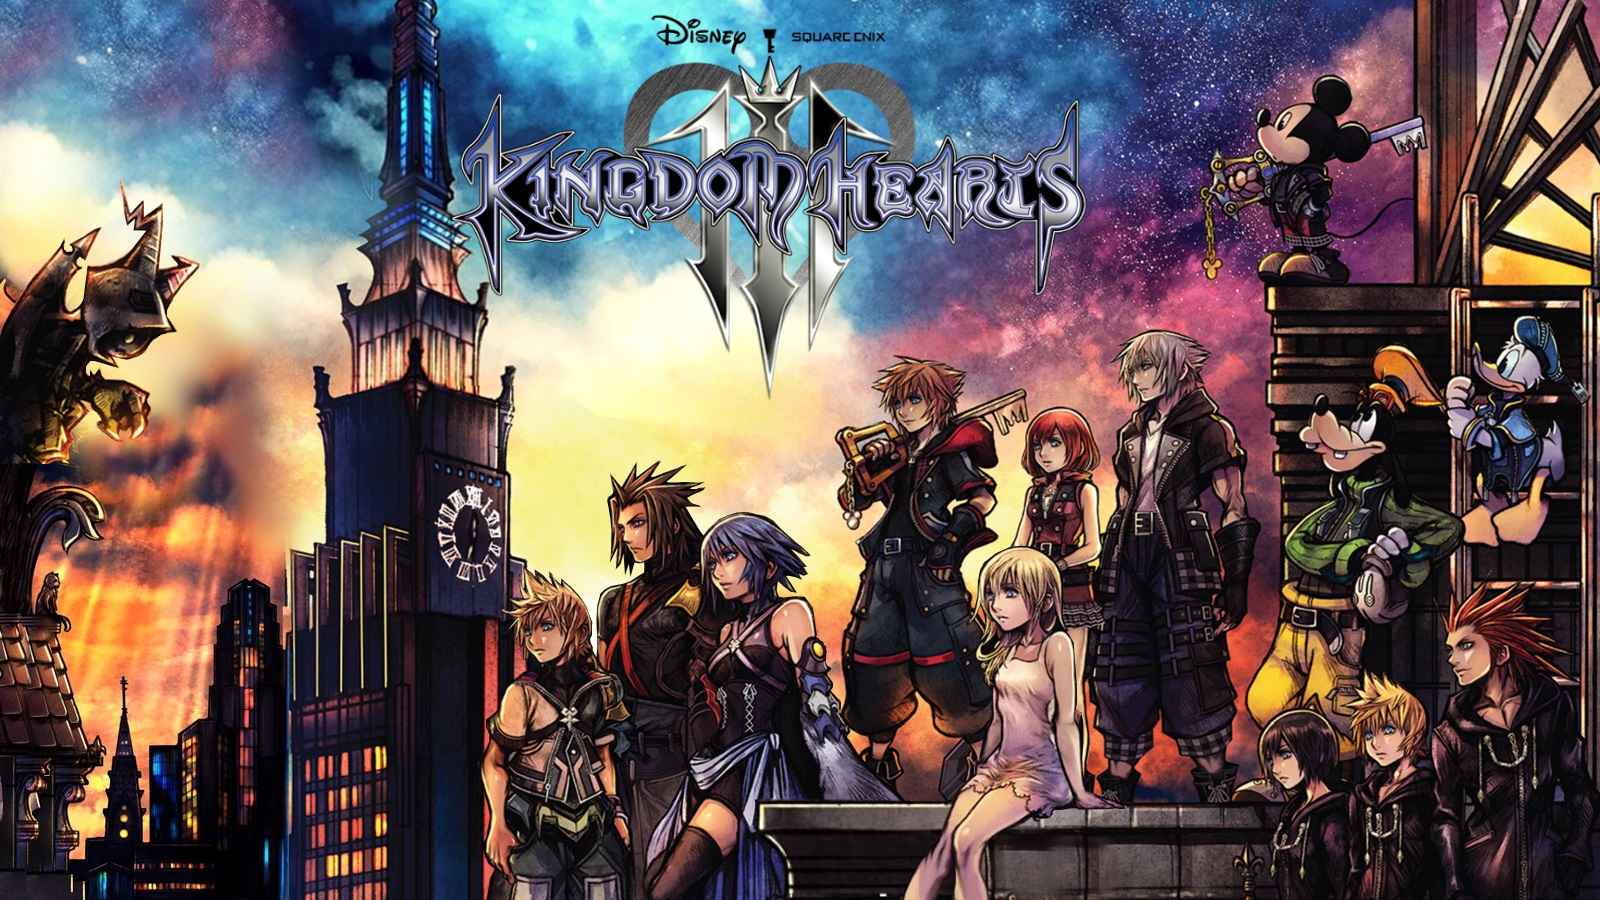 Kingdom Hearts Iii Wallpapers Hd And A Little Overview Visual Arts Ideas